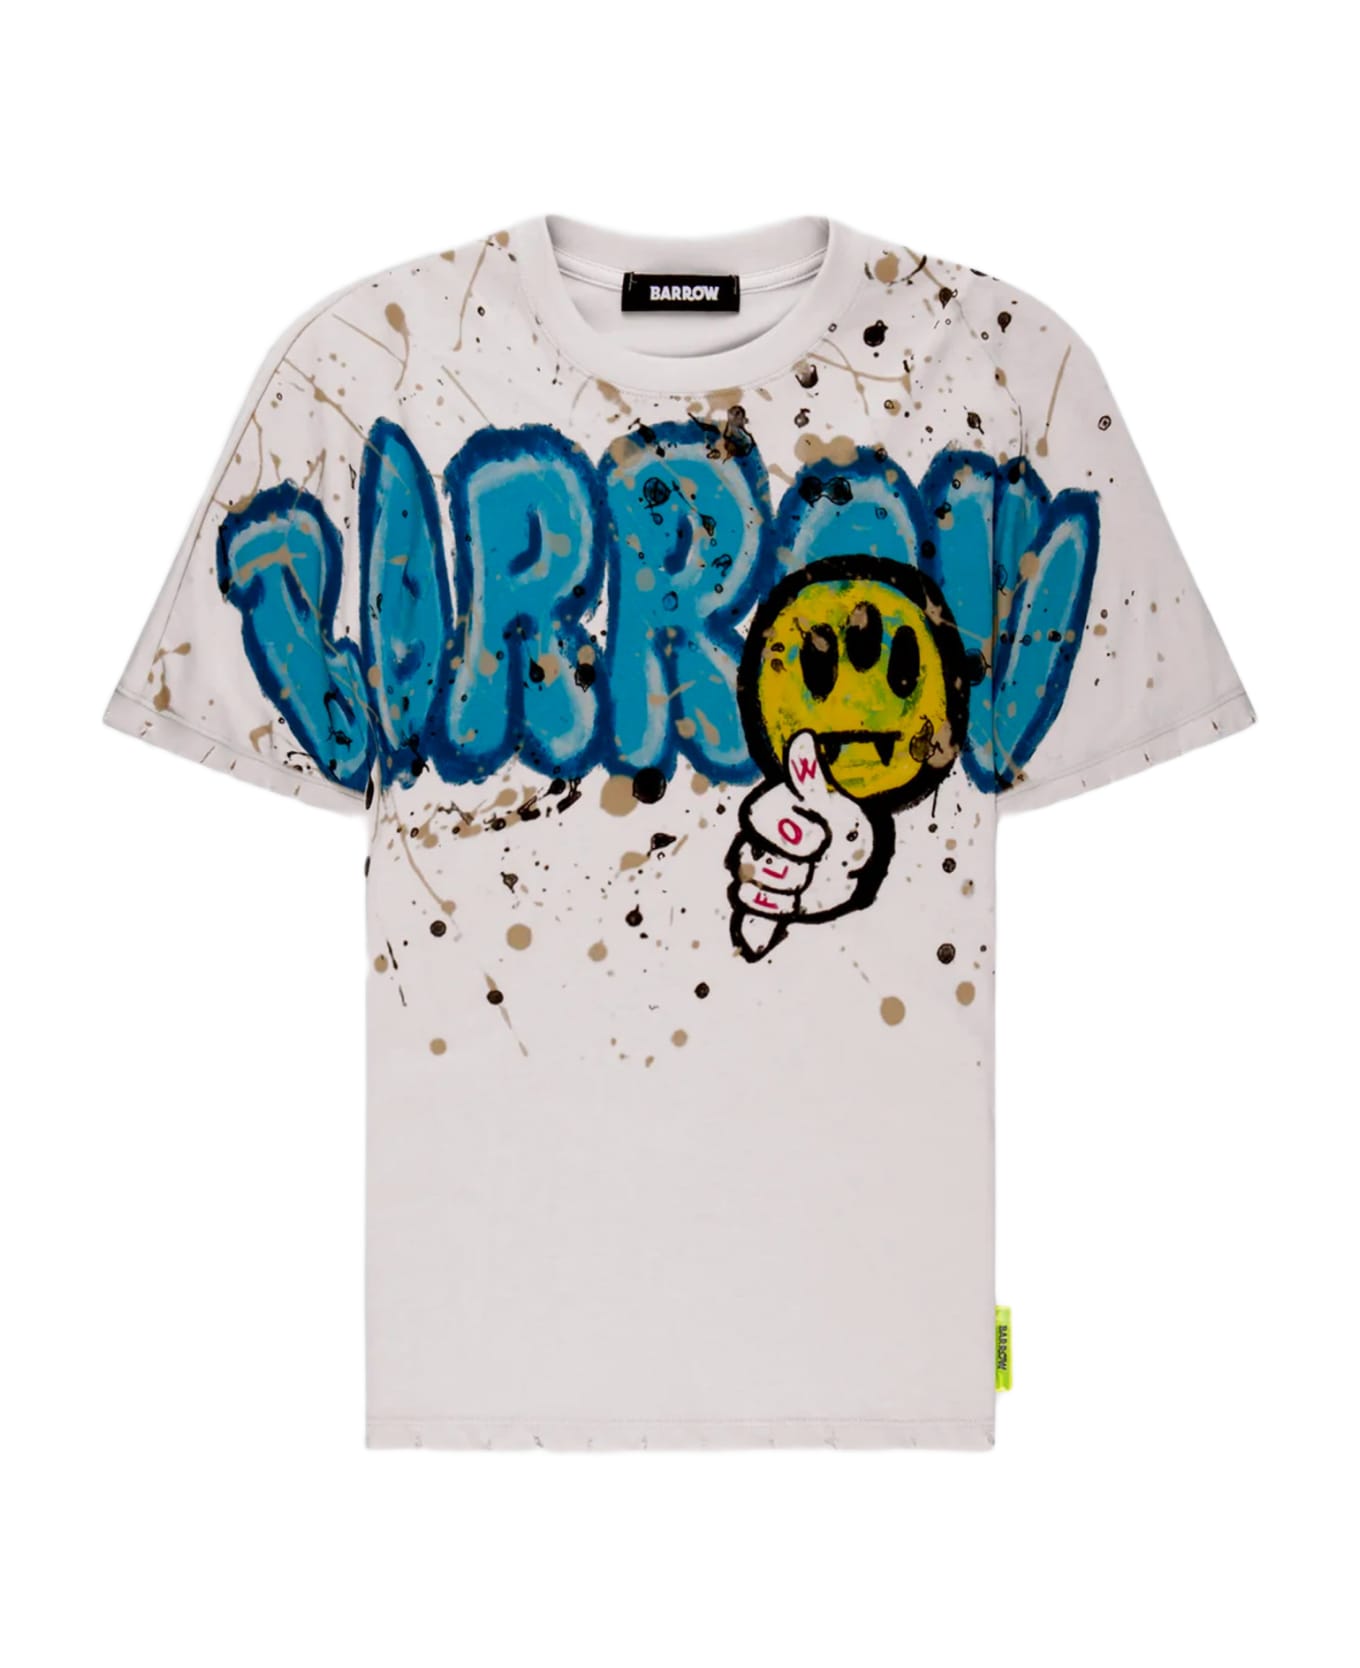 Barrow Jersey T-shirt Unisex Off White Cotton T-shirt With Graffiti Logo And Smile Print - Beige